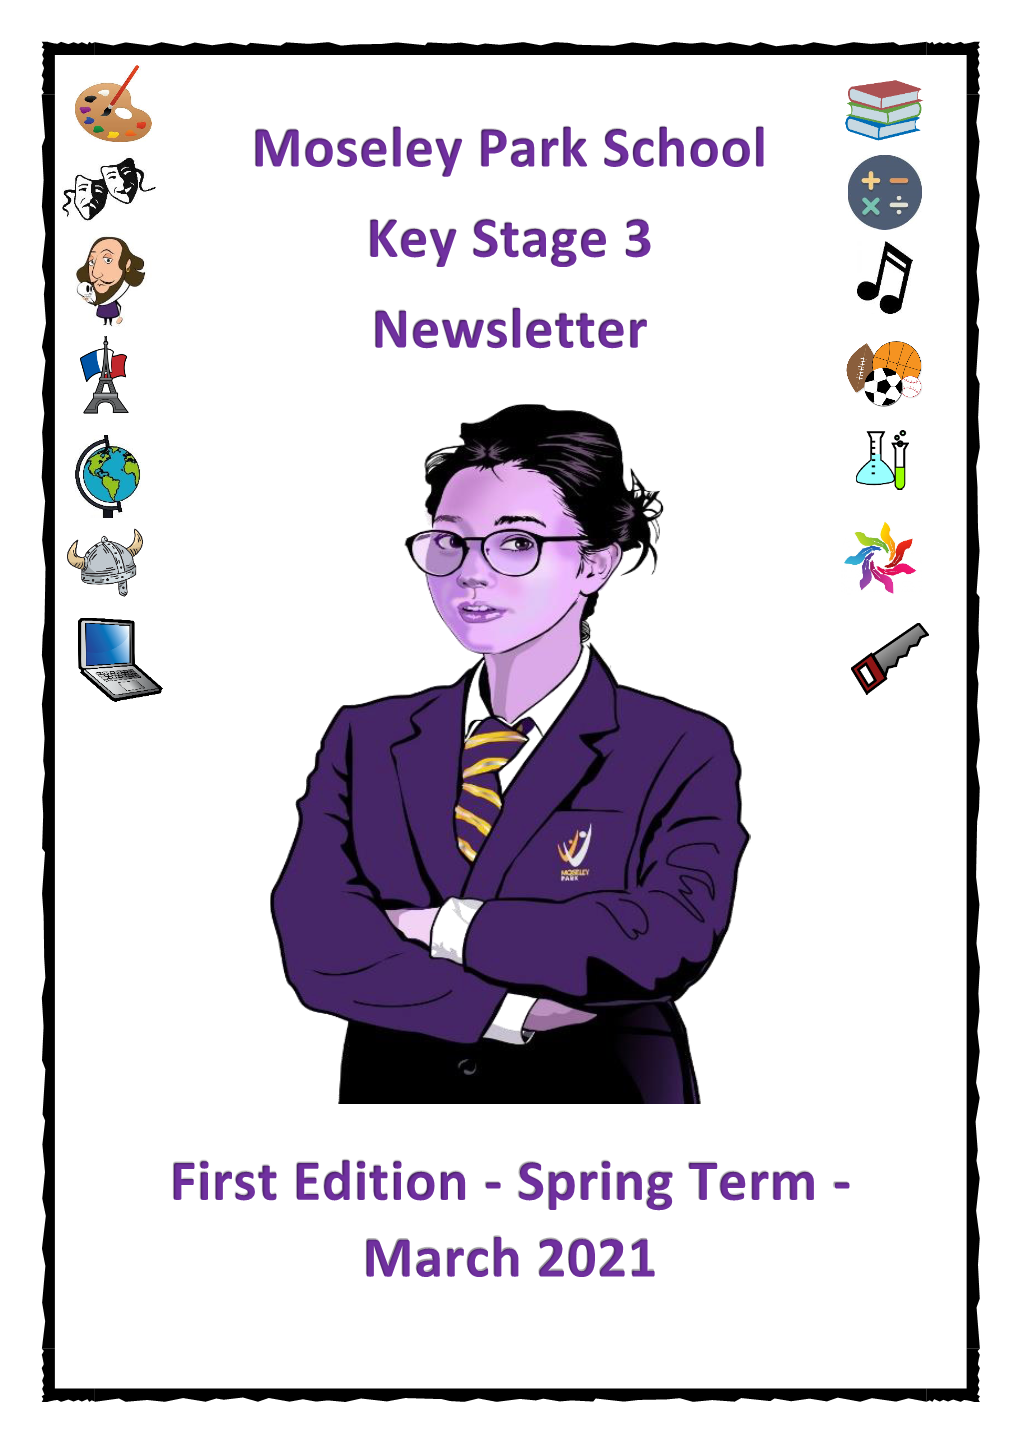 Moseley Park School Key Stage 3 Newsletter First Edition